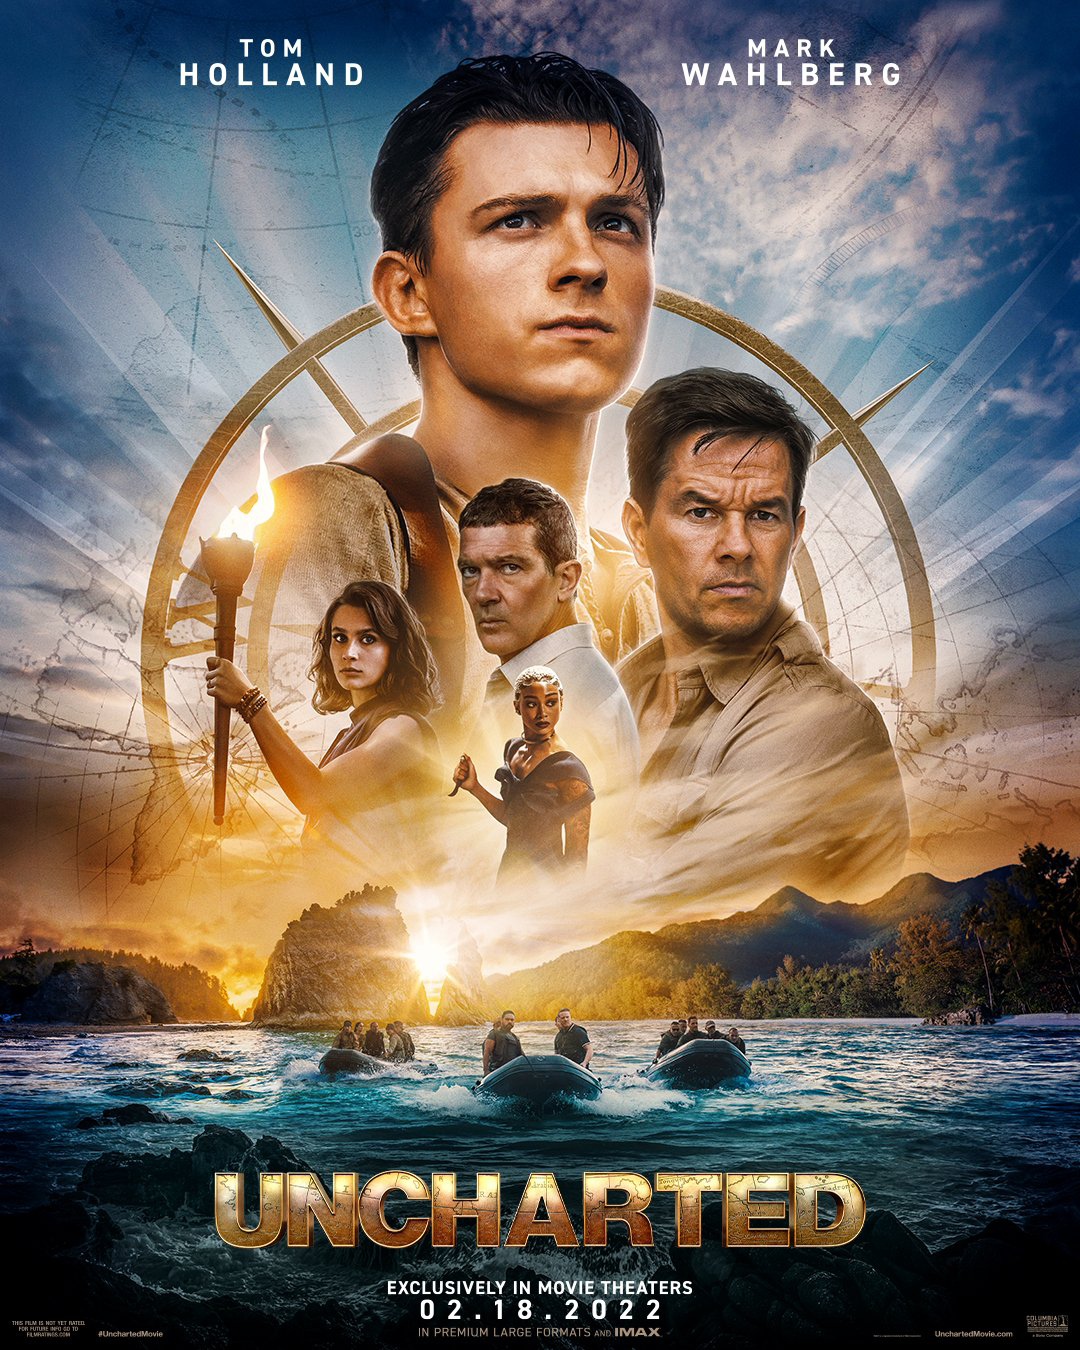 Uncharted Movie Release Date, Cast, and Reviews.